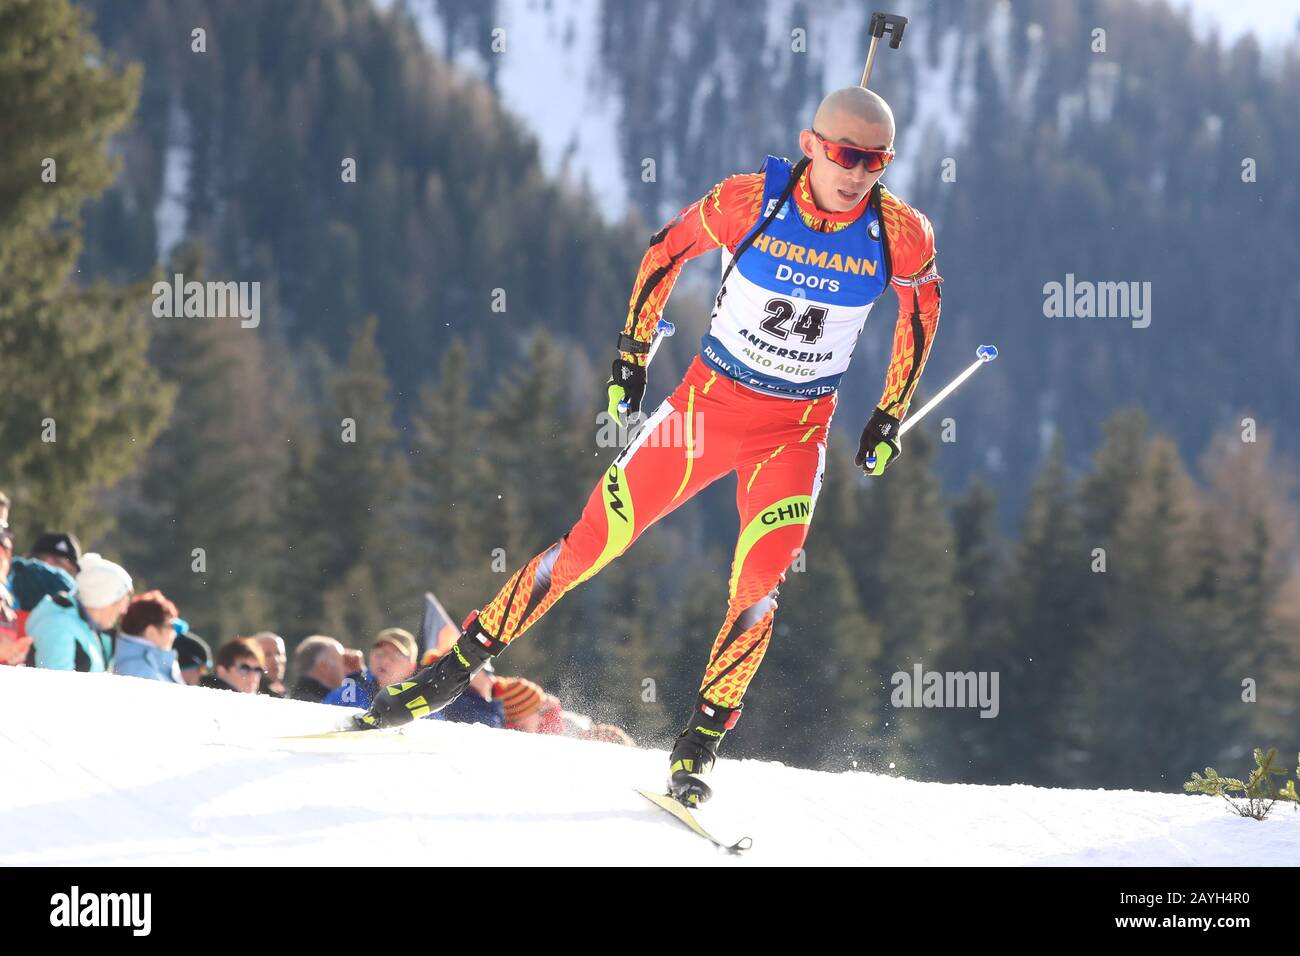 The IBU Biathlon World Championships 2020, at Anterselva - Antholz, Italy on 15/02/2020., Men 10 Km Sprint, Fangming Cheng (CHN). (Photo by Pierre Teyssot/Espa-Images) Credit: European Sports Photographic Agency/Alamy Live News Stock Photo